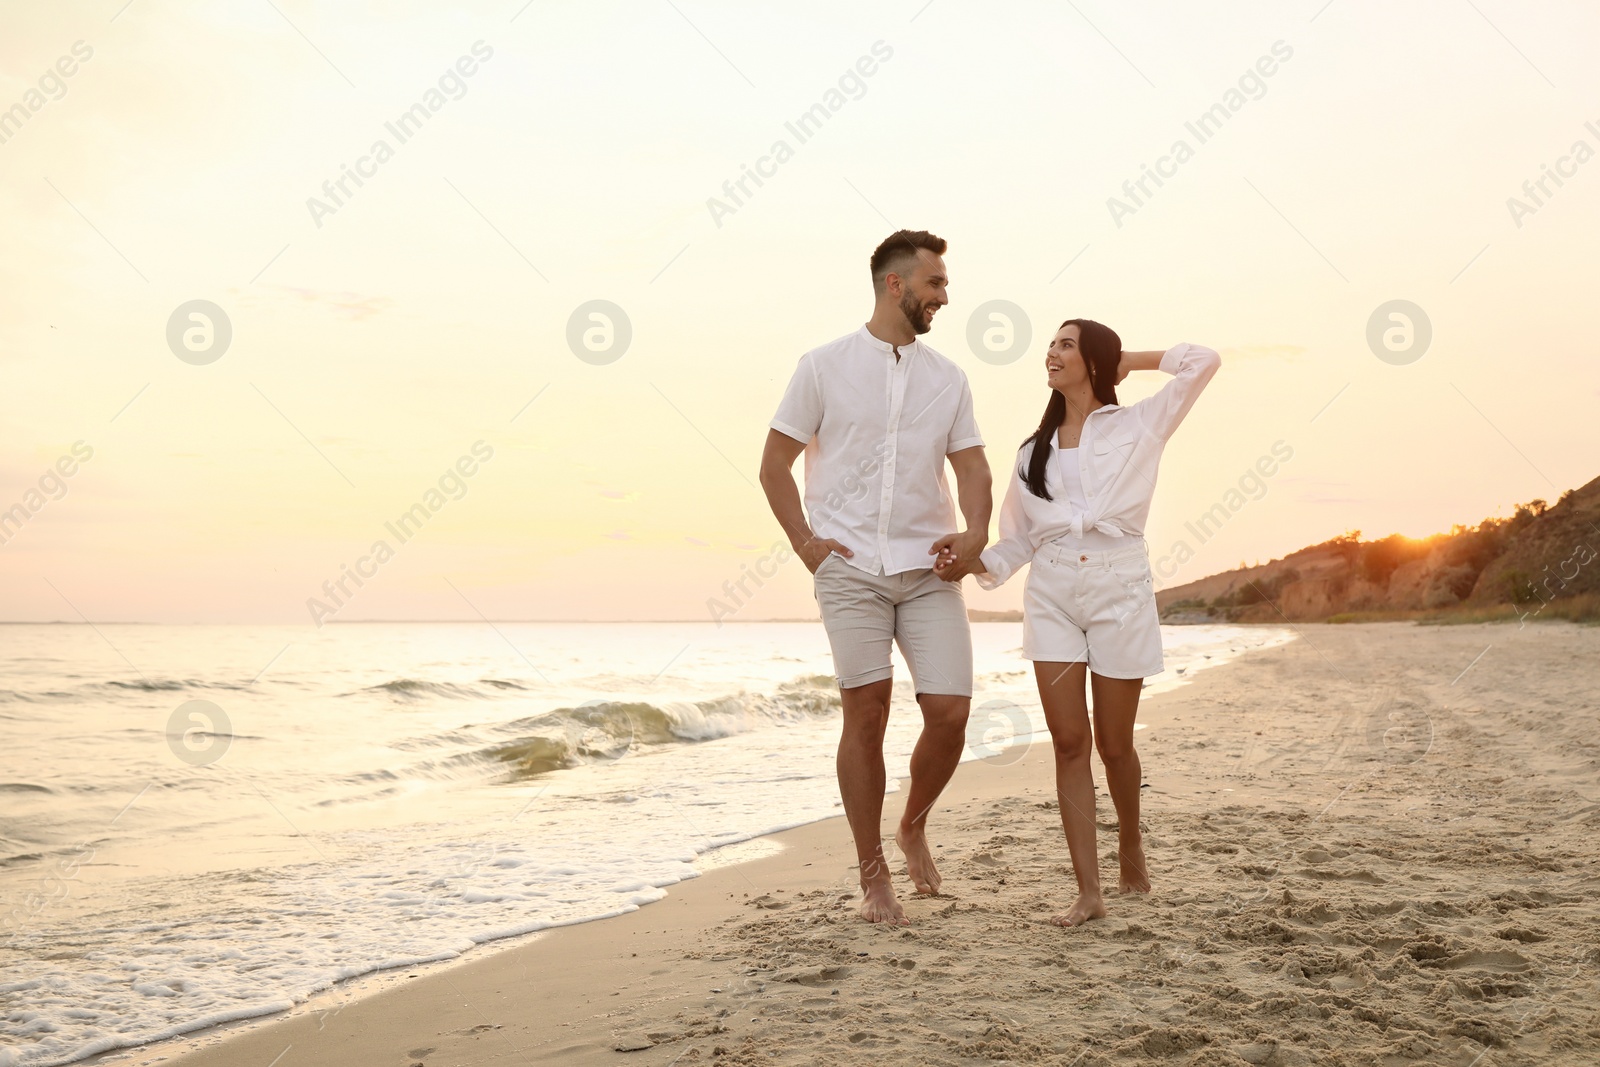 Photo of Happy young couple walking together on beach at sunset